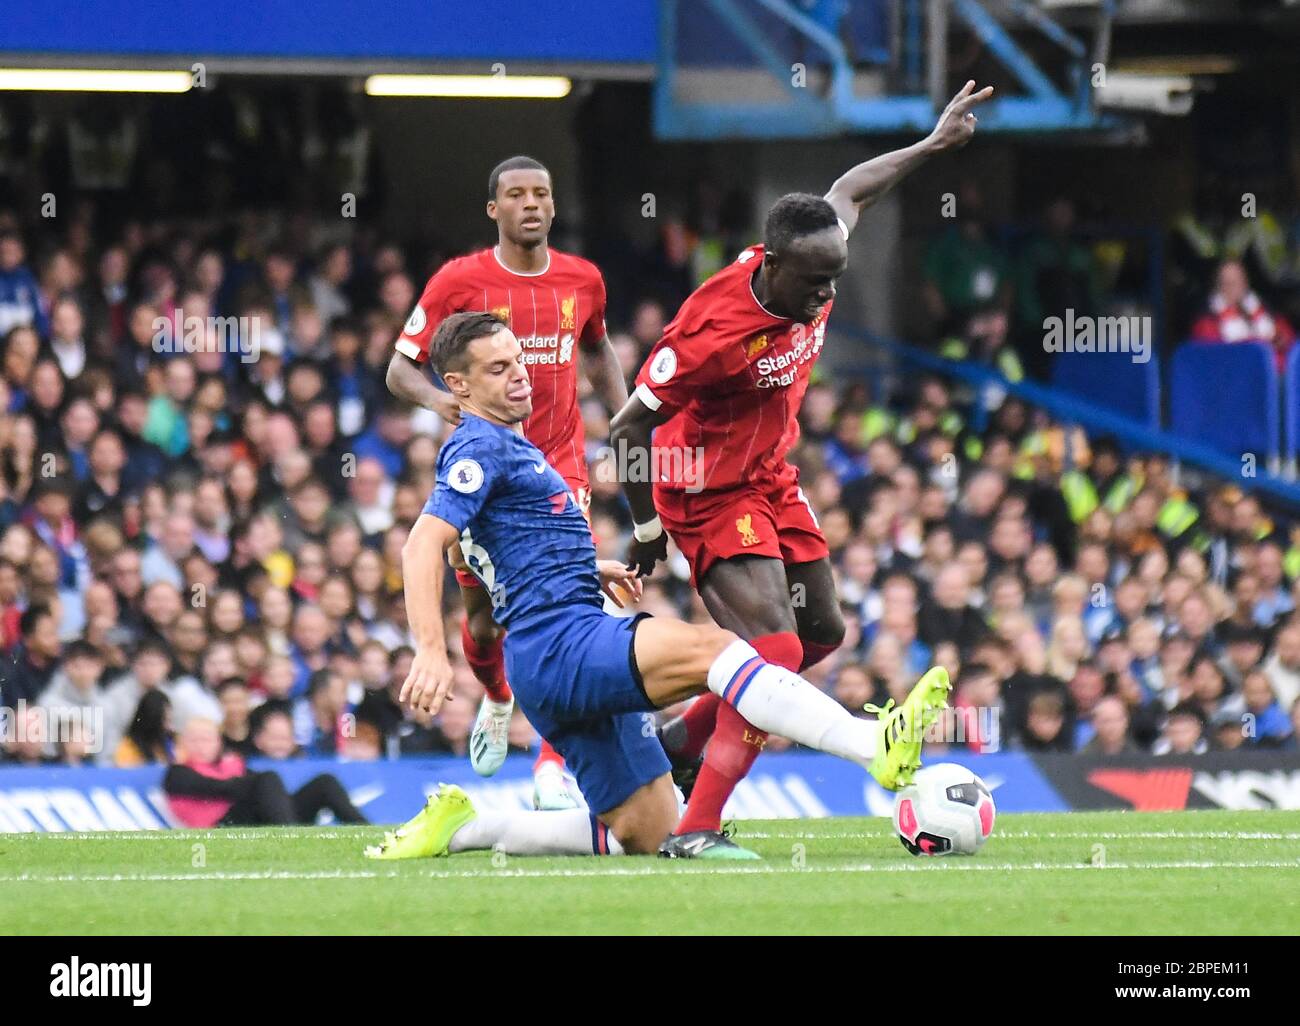 LONDON, ENGLAND - SEPTEMBER 22, 2019: Cesar Azpilicueta of Chelsea (L) and Sadio Mane of Liverpool (R) pictured during the 2019/20 Premier League game between Chelsea FC and Liverpool FC at Stamford Bridge. Stock Photo